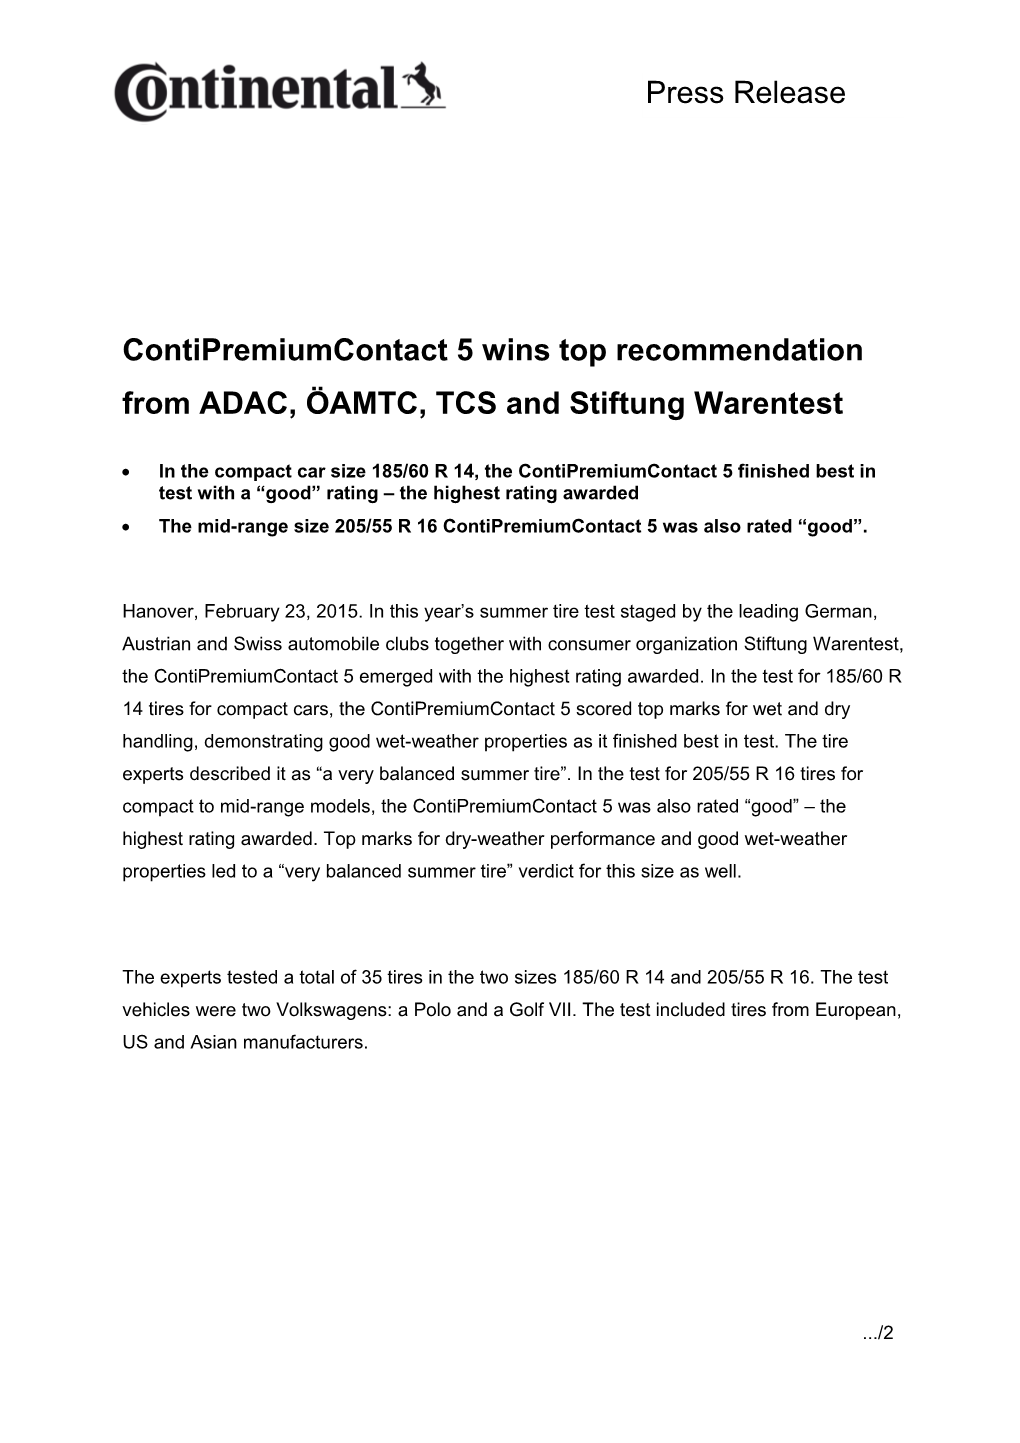 Contipremiumcontact 5 Wins Top Recommendation from ADAC, ÖAMTC, TCS and Stiftung Warentest